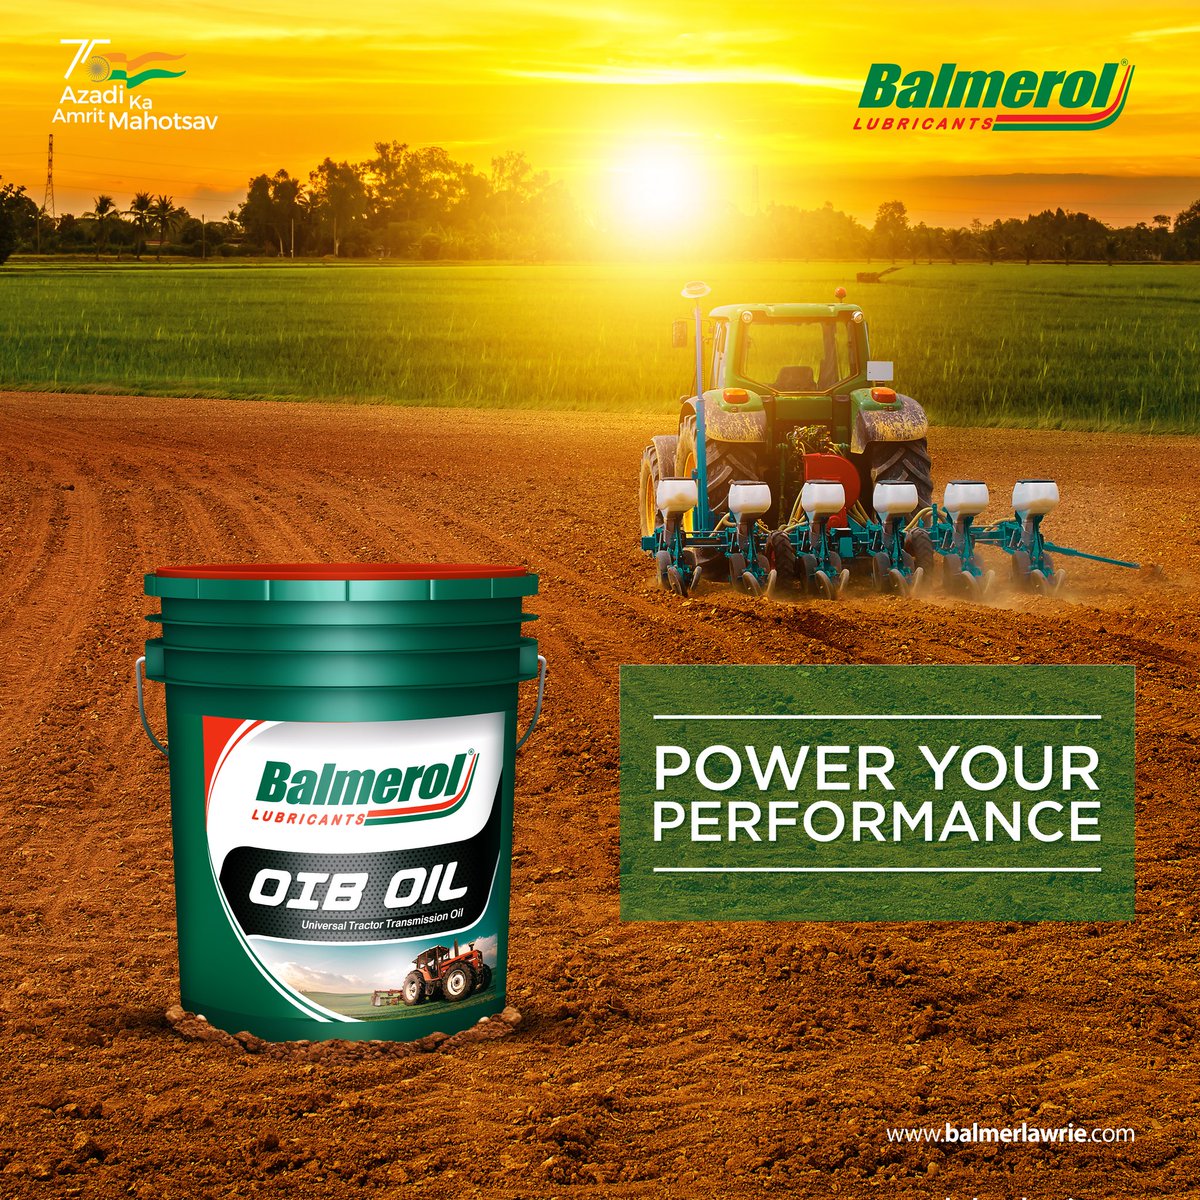 OIB is a universal tractor transmission oil manufactured for agricultural equipments operating under high load conditions.

It is an essential heat transfer medium for wet brakes & supports noise free brake operation for longer periods.

#balmerol #oib #transmissionoil #tractors